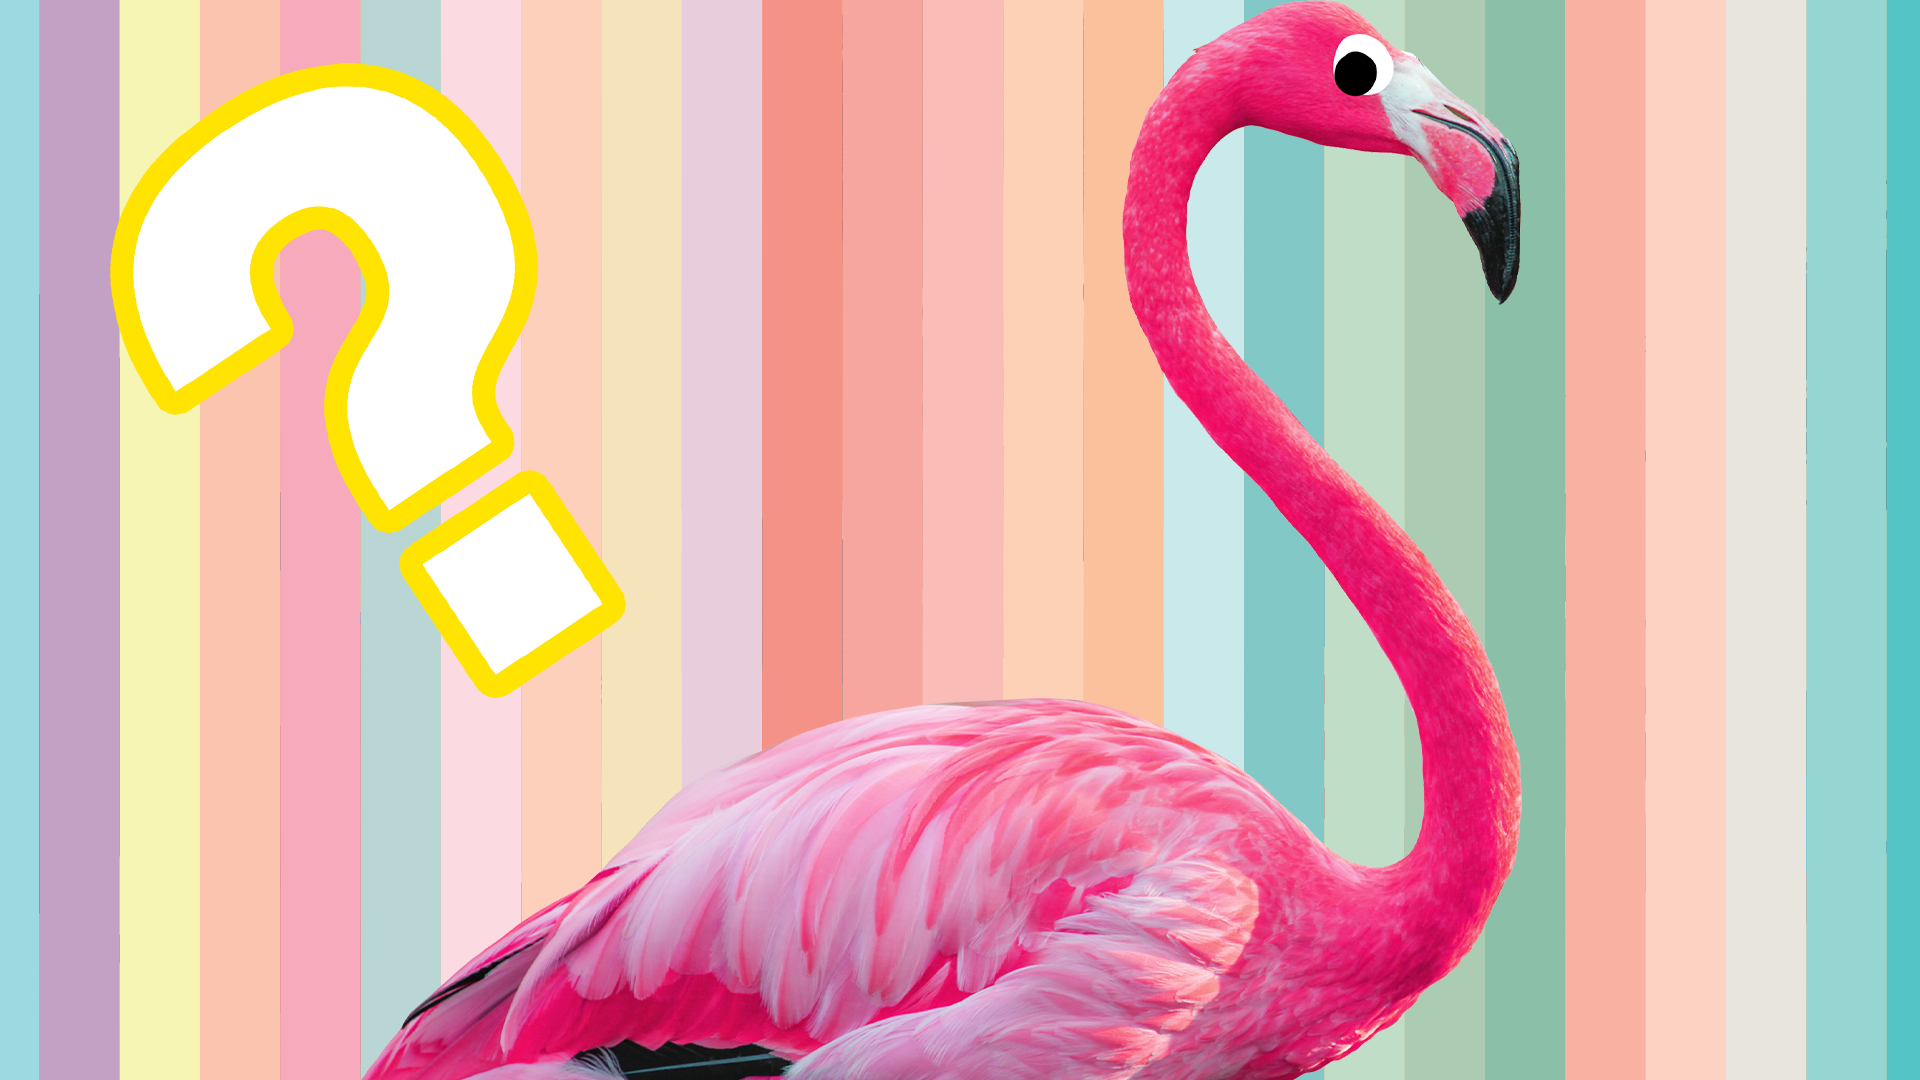 A flamingo and question mark on rainbow background